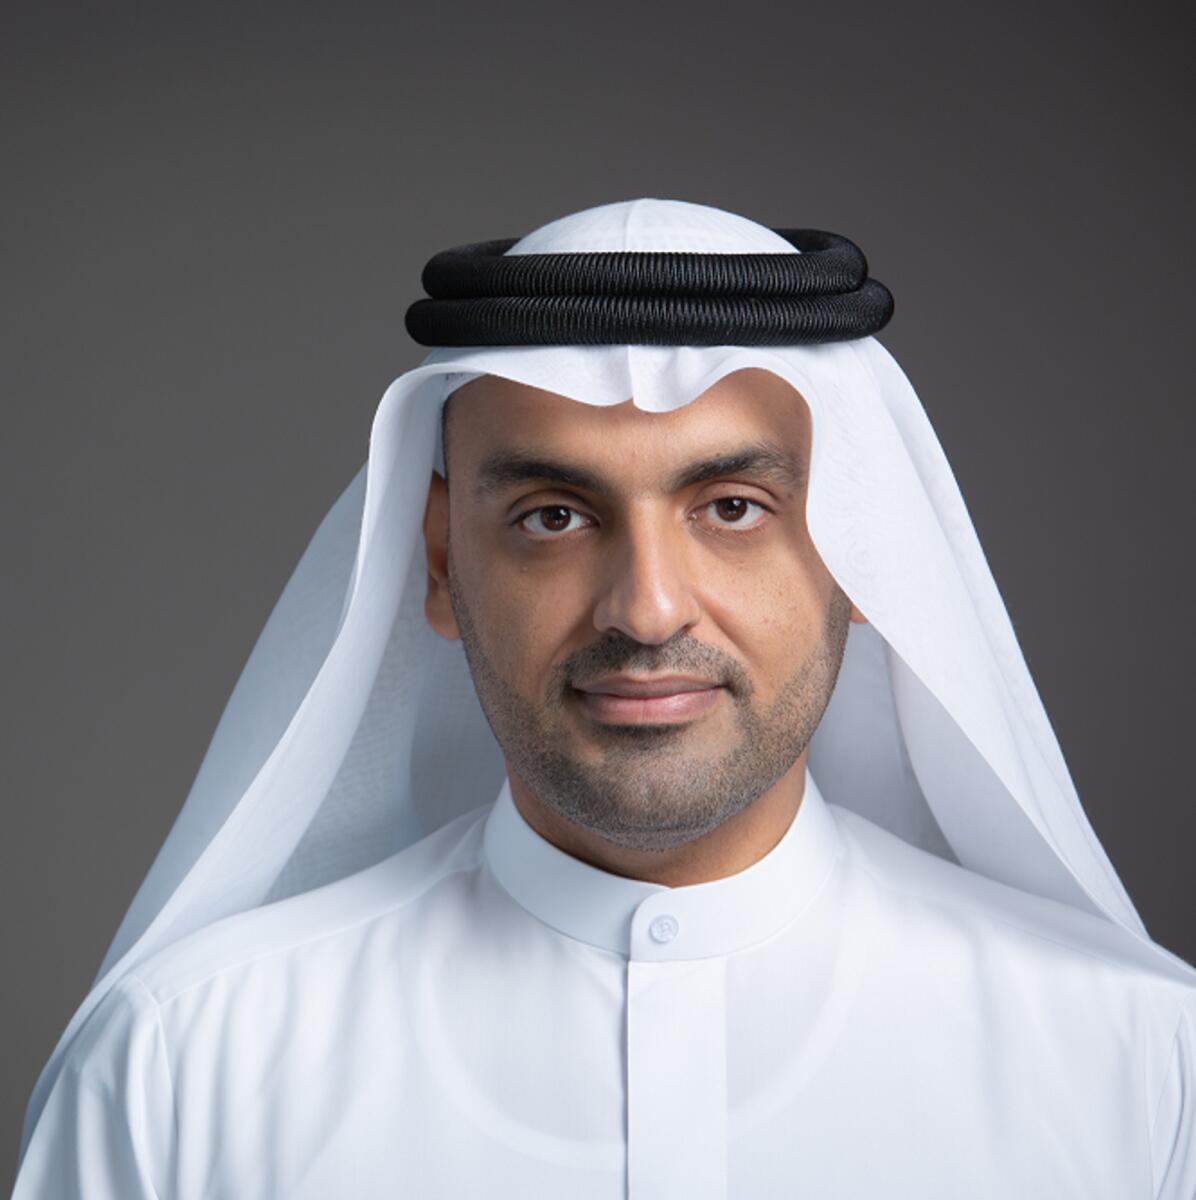 Mohammad Ali Rashed Lootah, president and CEO of Dubai Chambers, said the creation of sector-specific business groups is in line with the chamber's ongoing mission to continuously improve the business environment in Dubai.